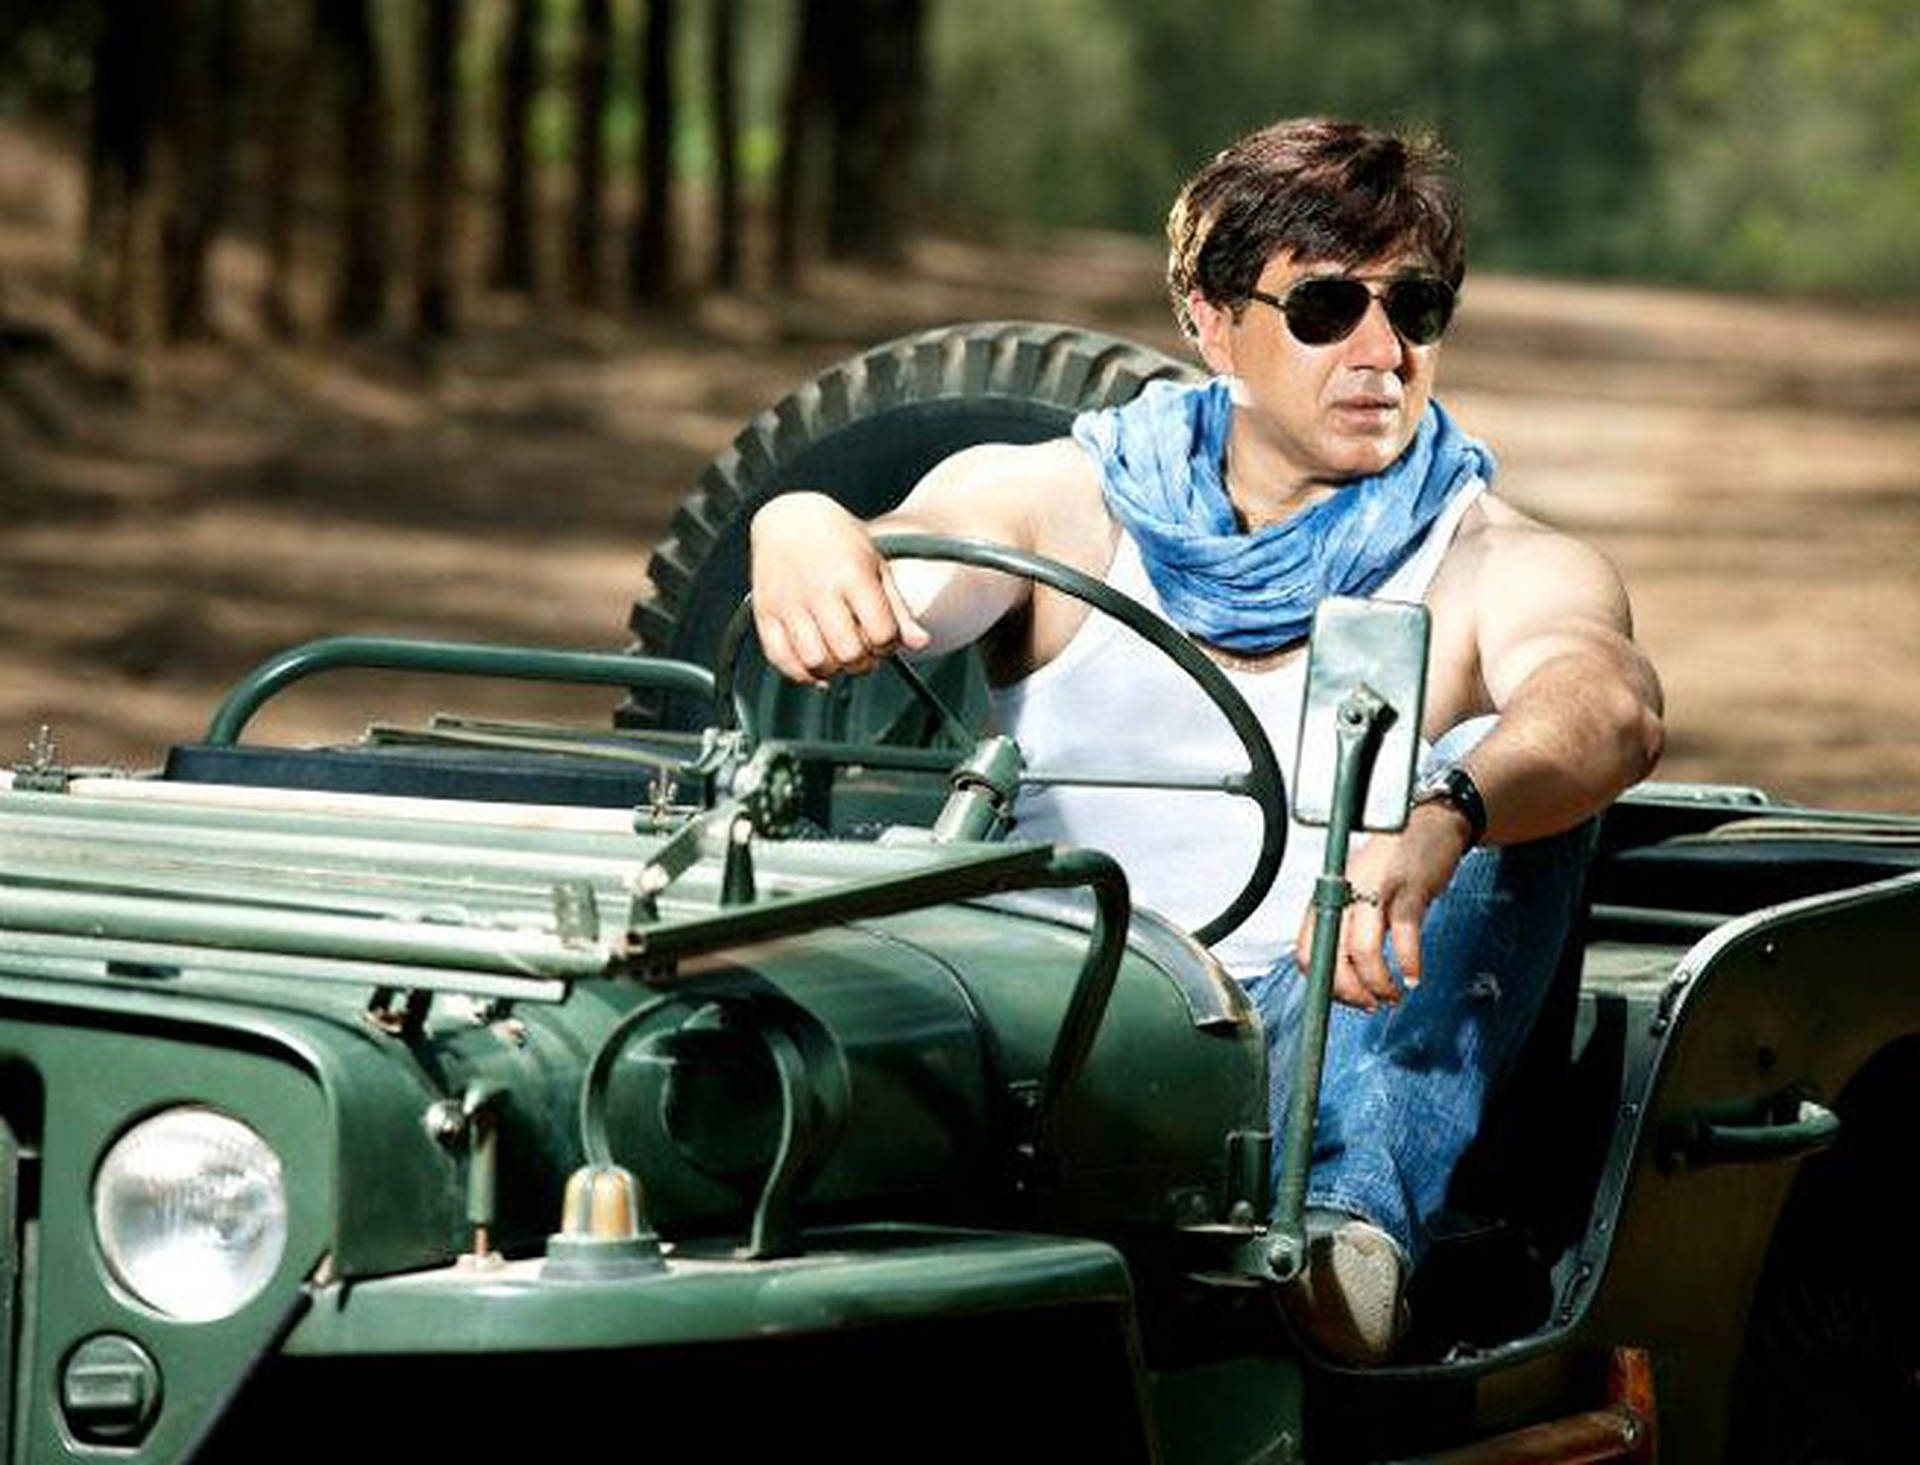 Sunny Deol In Green Vehicle Wallpaper